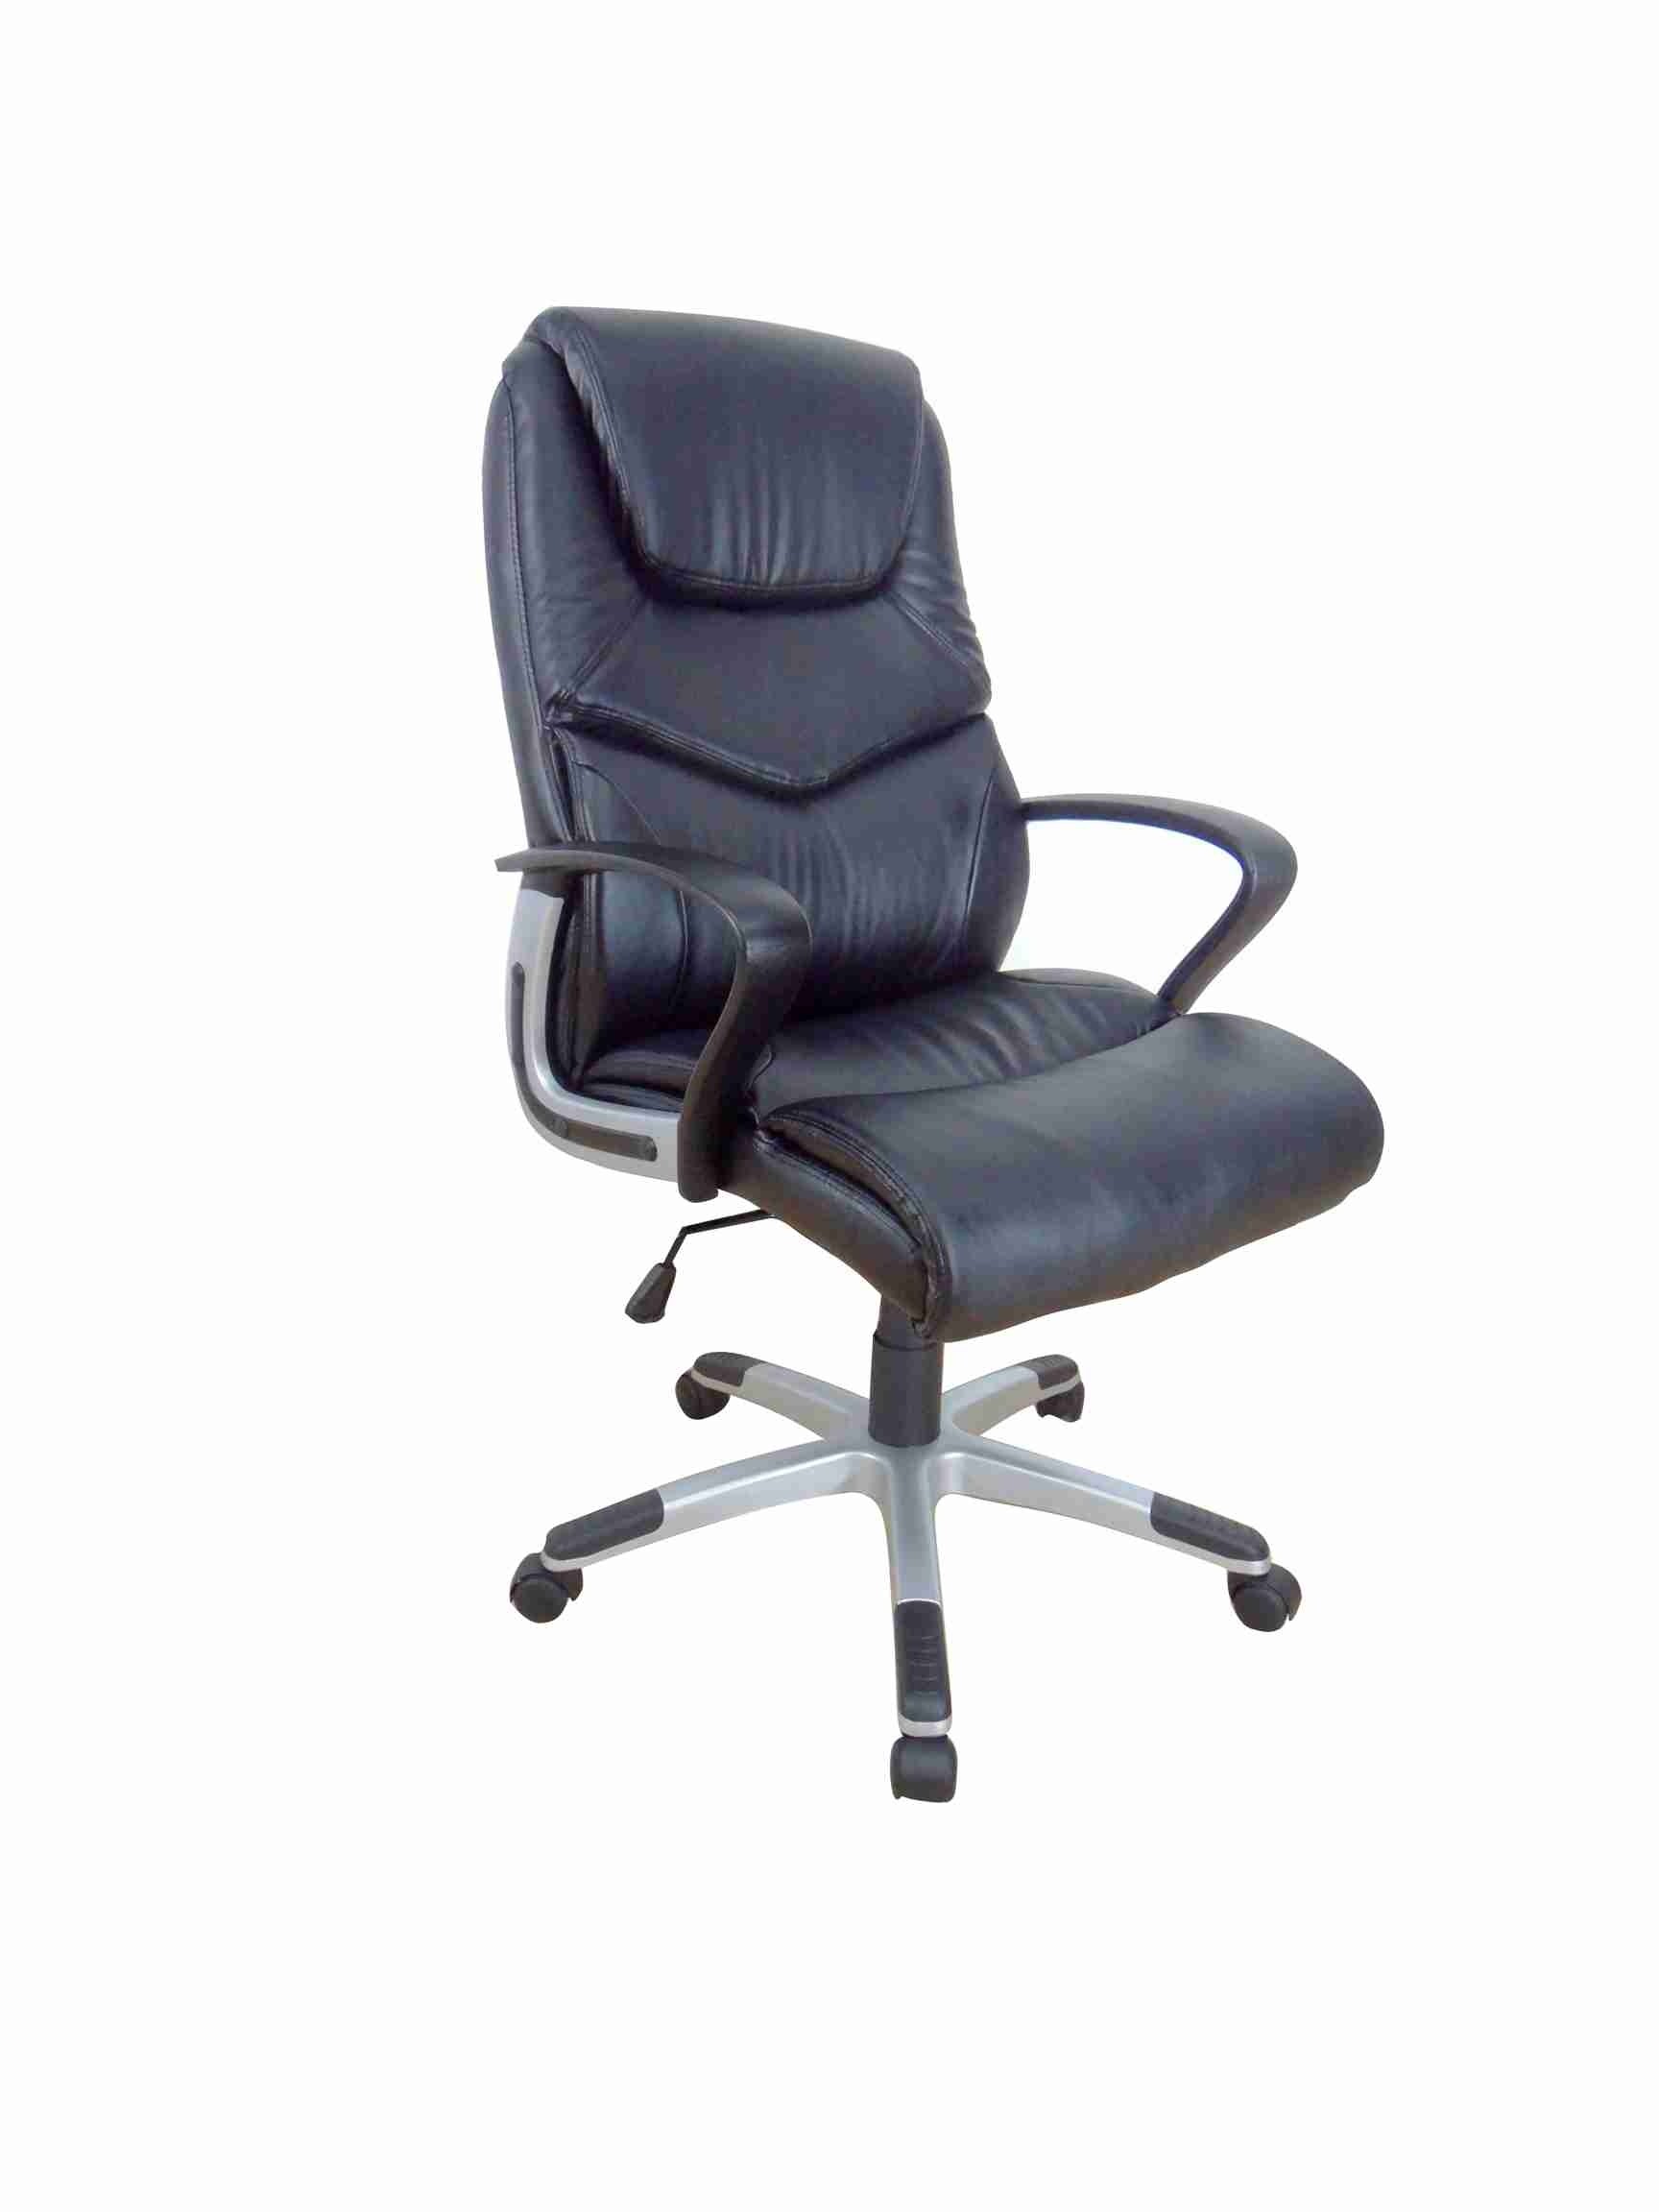 Office, Executive, Leader Chair With Bounded Leather And Adjustable Height-10744